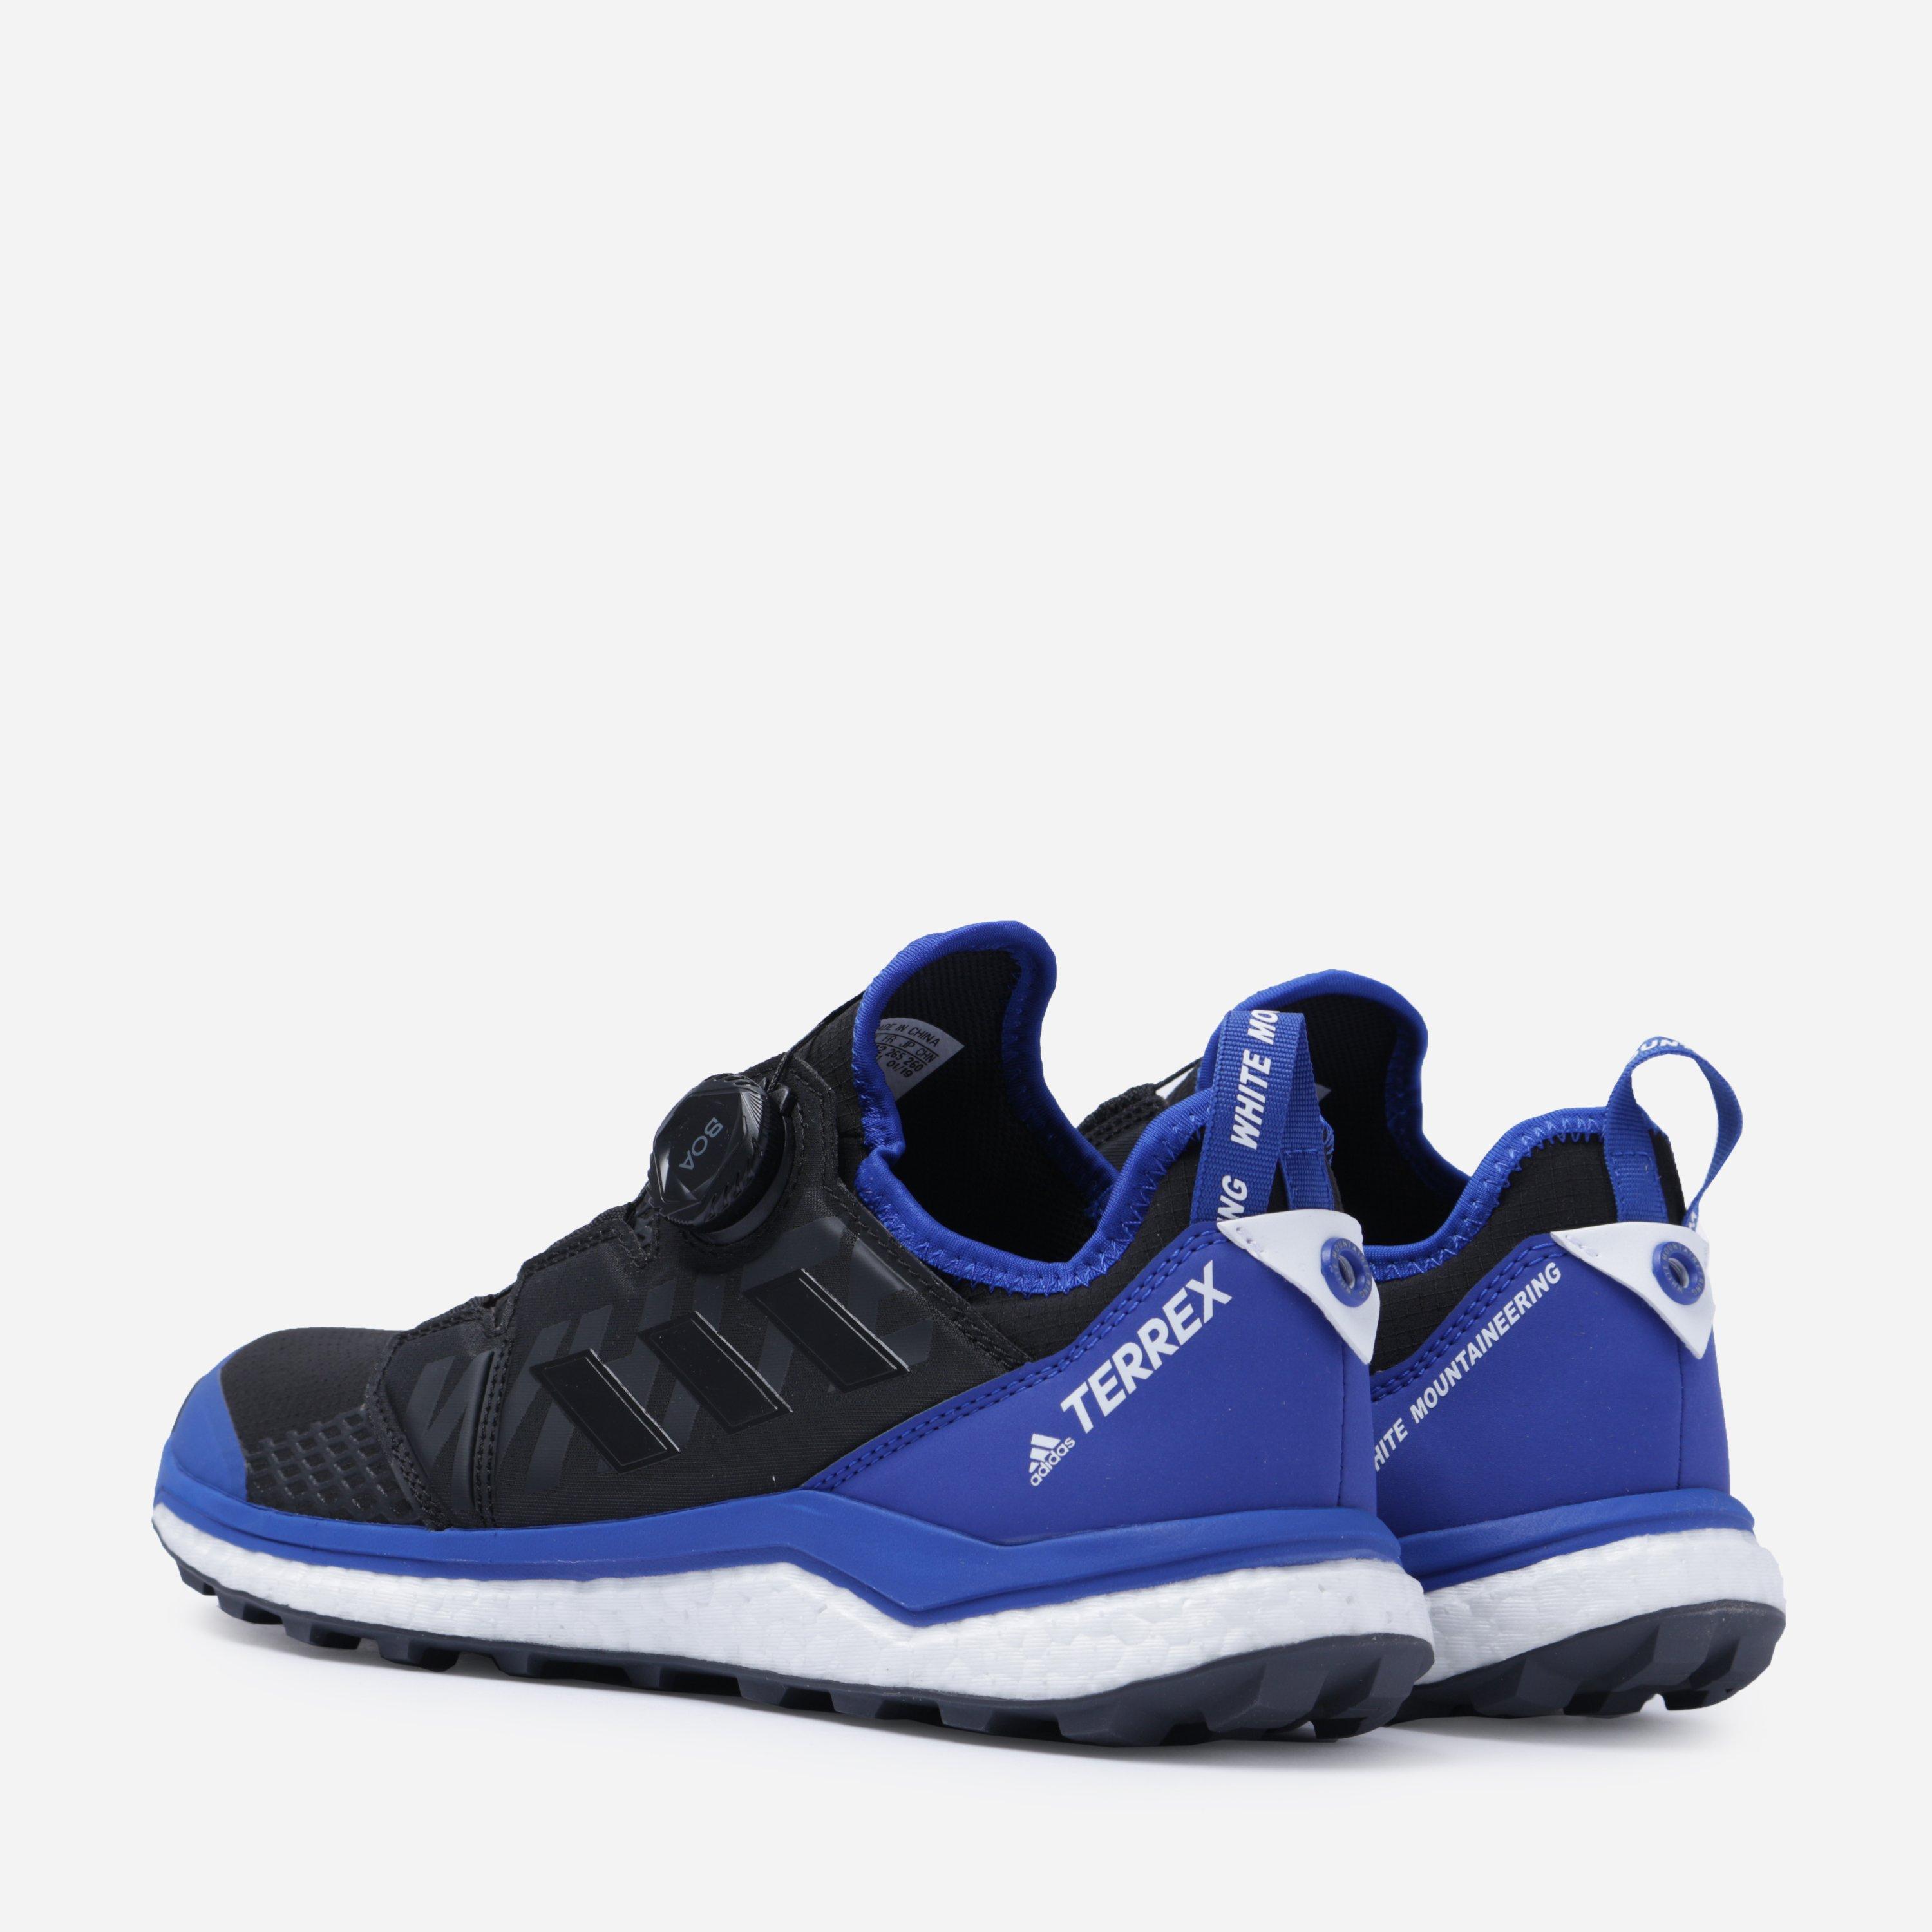 Adidas White Mountaineering Boa Norway, SAVE 48% - aveclumiere.com